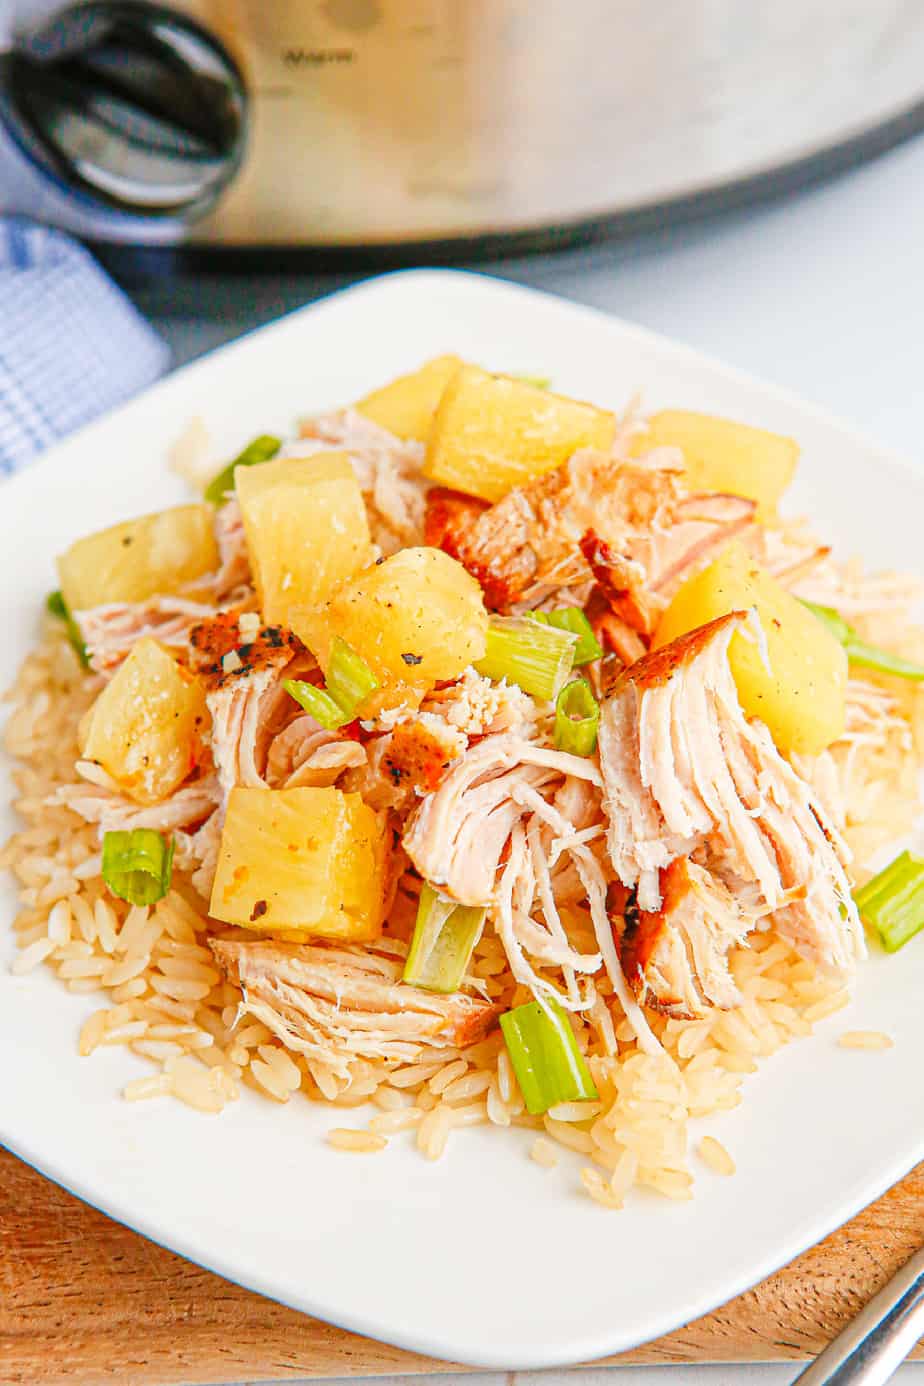 Plate of shredded pork and pineapple over rice up close with a slow cooker in the background